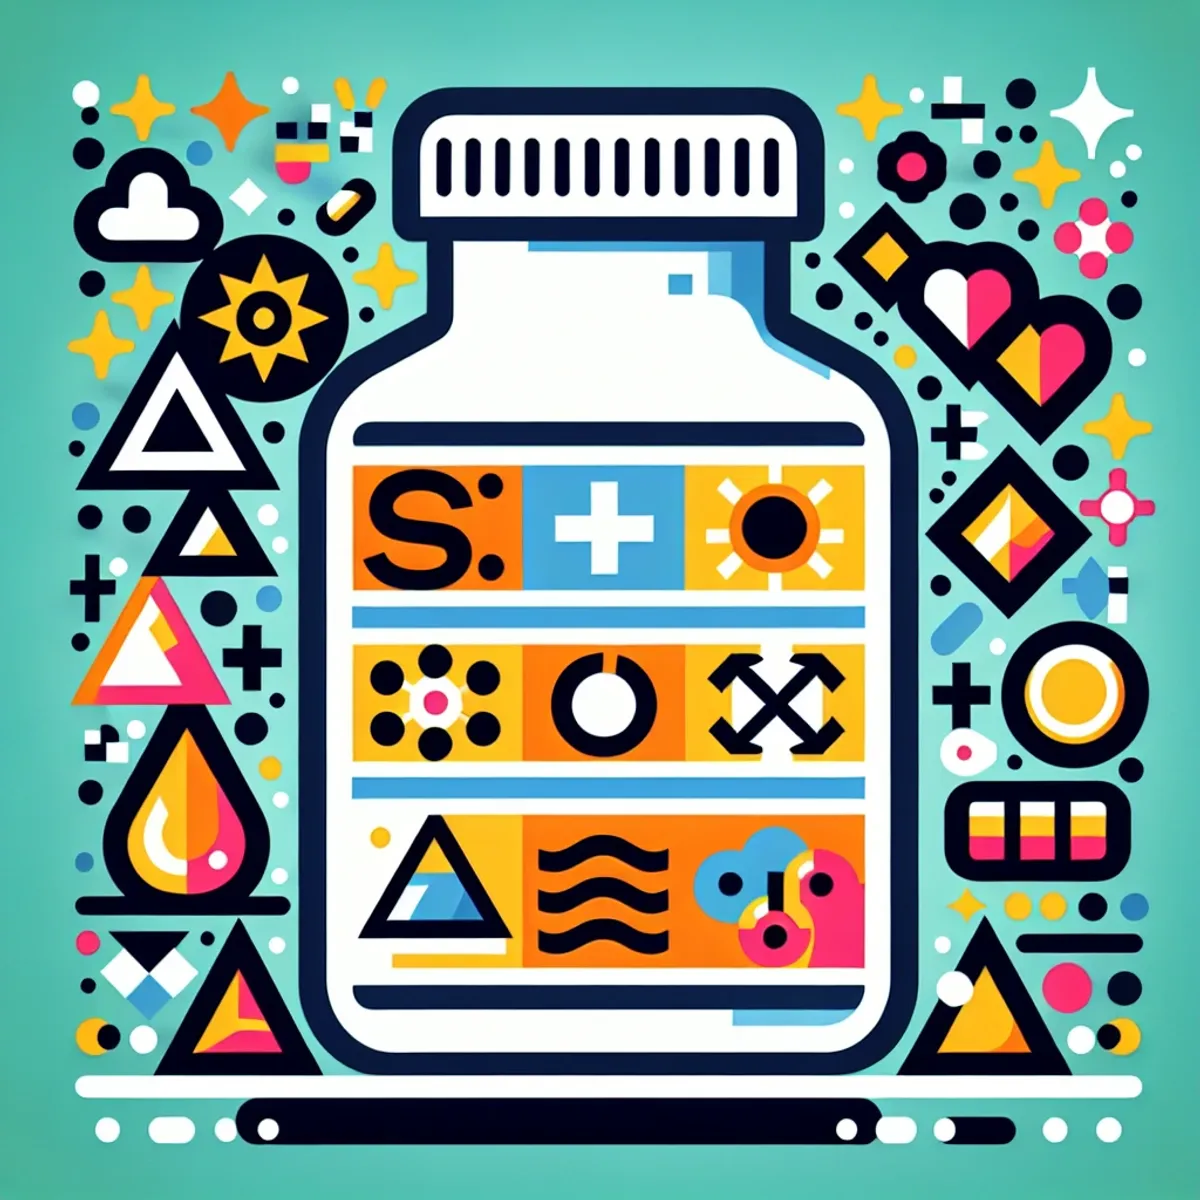 A pill bottle with symbols representing Tianeptine forms: a salt shaker for sodium, a sulfur symbol for sulfate, and a lemon for free acid.